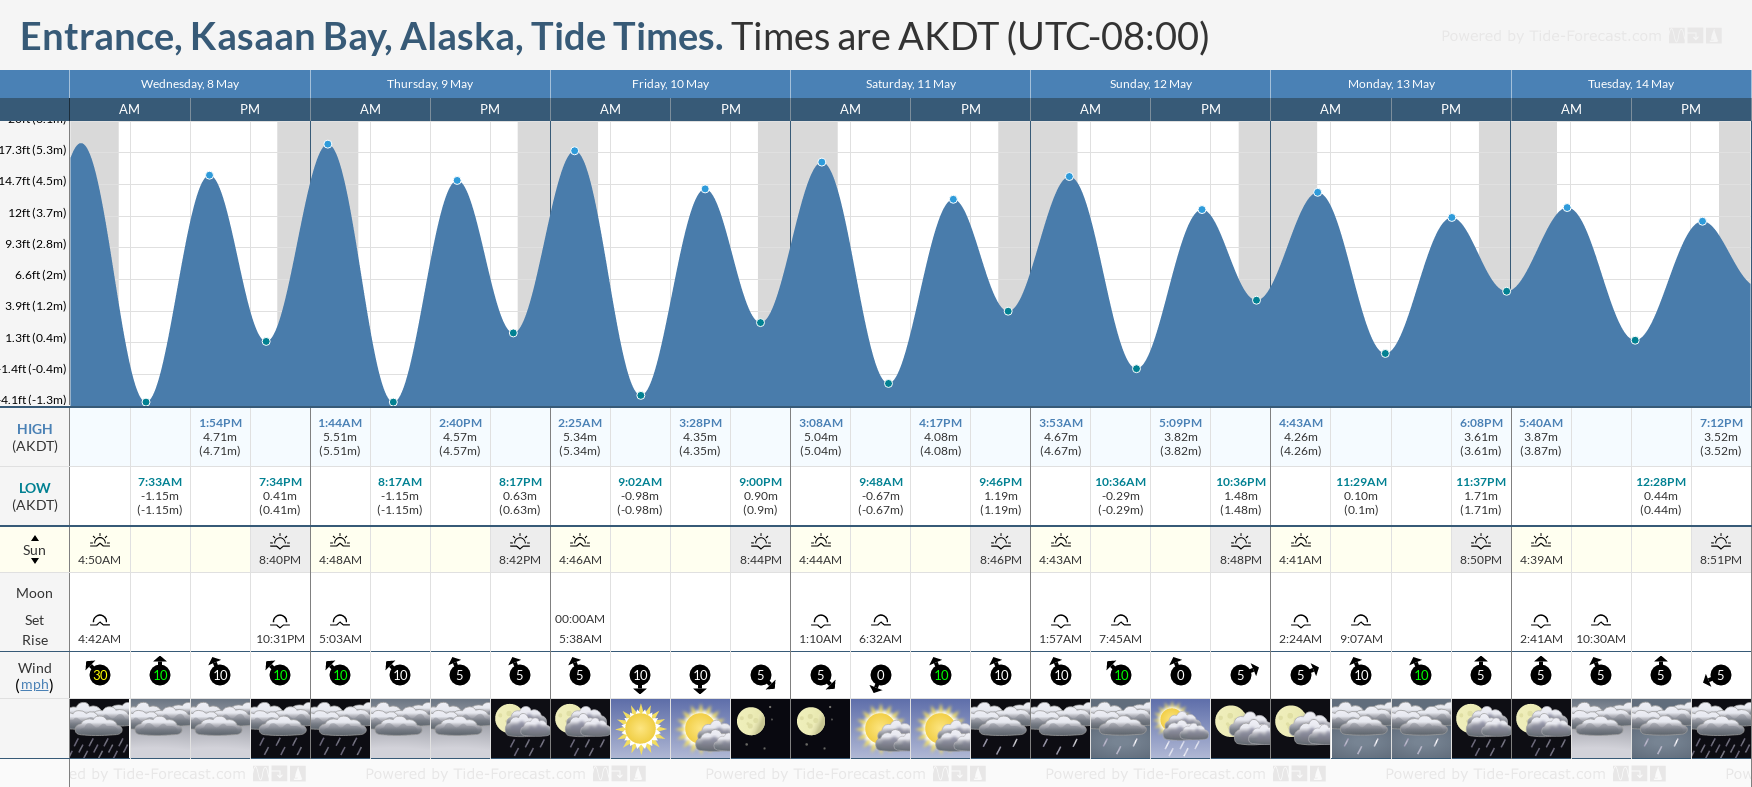 Entrance, Kasaan Bay, Alaska Tide Chart including high and low tide tide times for the next 7 days